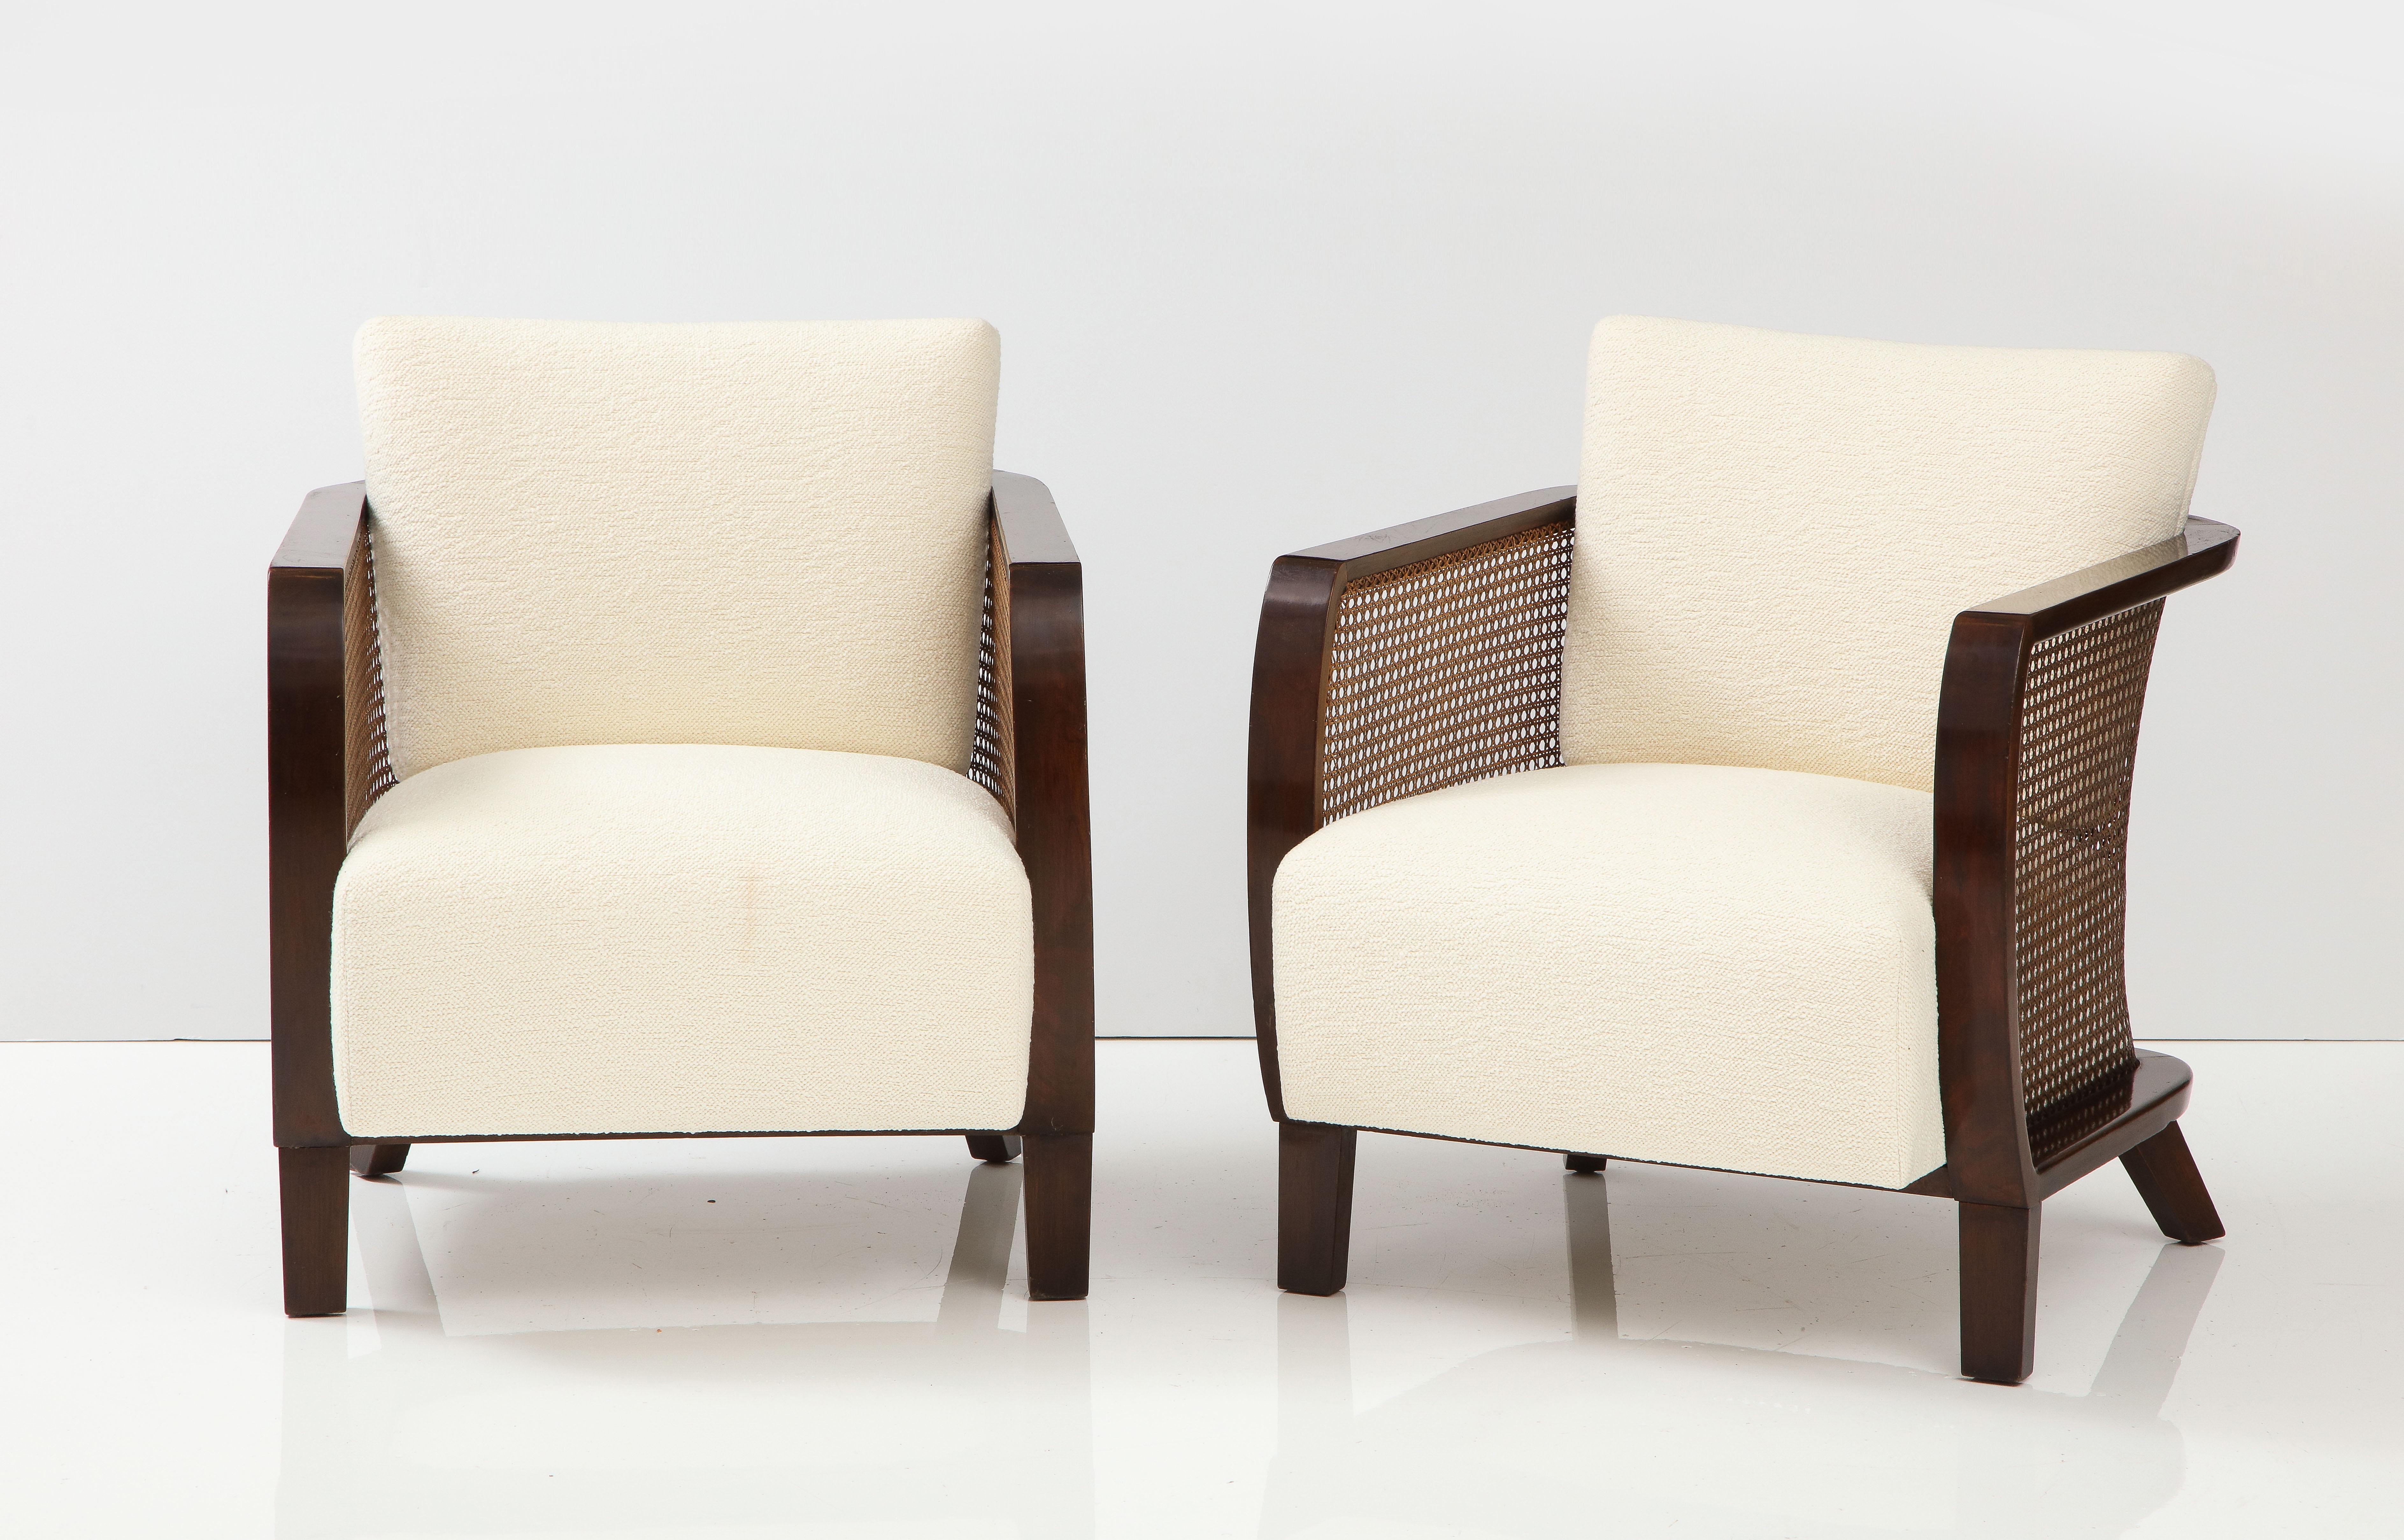 Pair of walnut and caned armchairs by Lajos Kozma.
Pair of walnut and caned armchairs designed by Austrian architect Lajos Kozma, 1930's. The arm chairs are distinguished by a bold and strong outline of beautifully curved wood design with caned